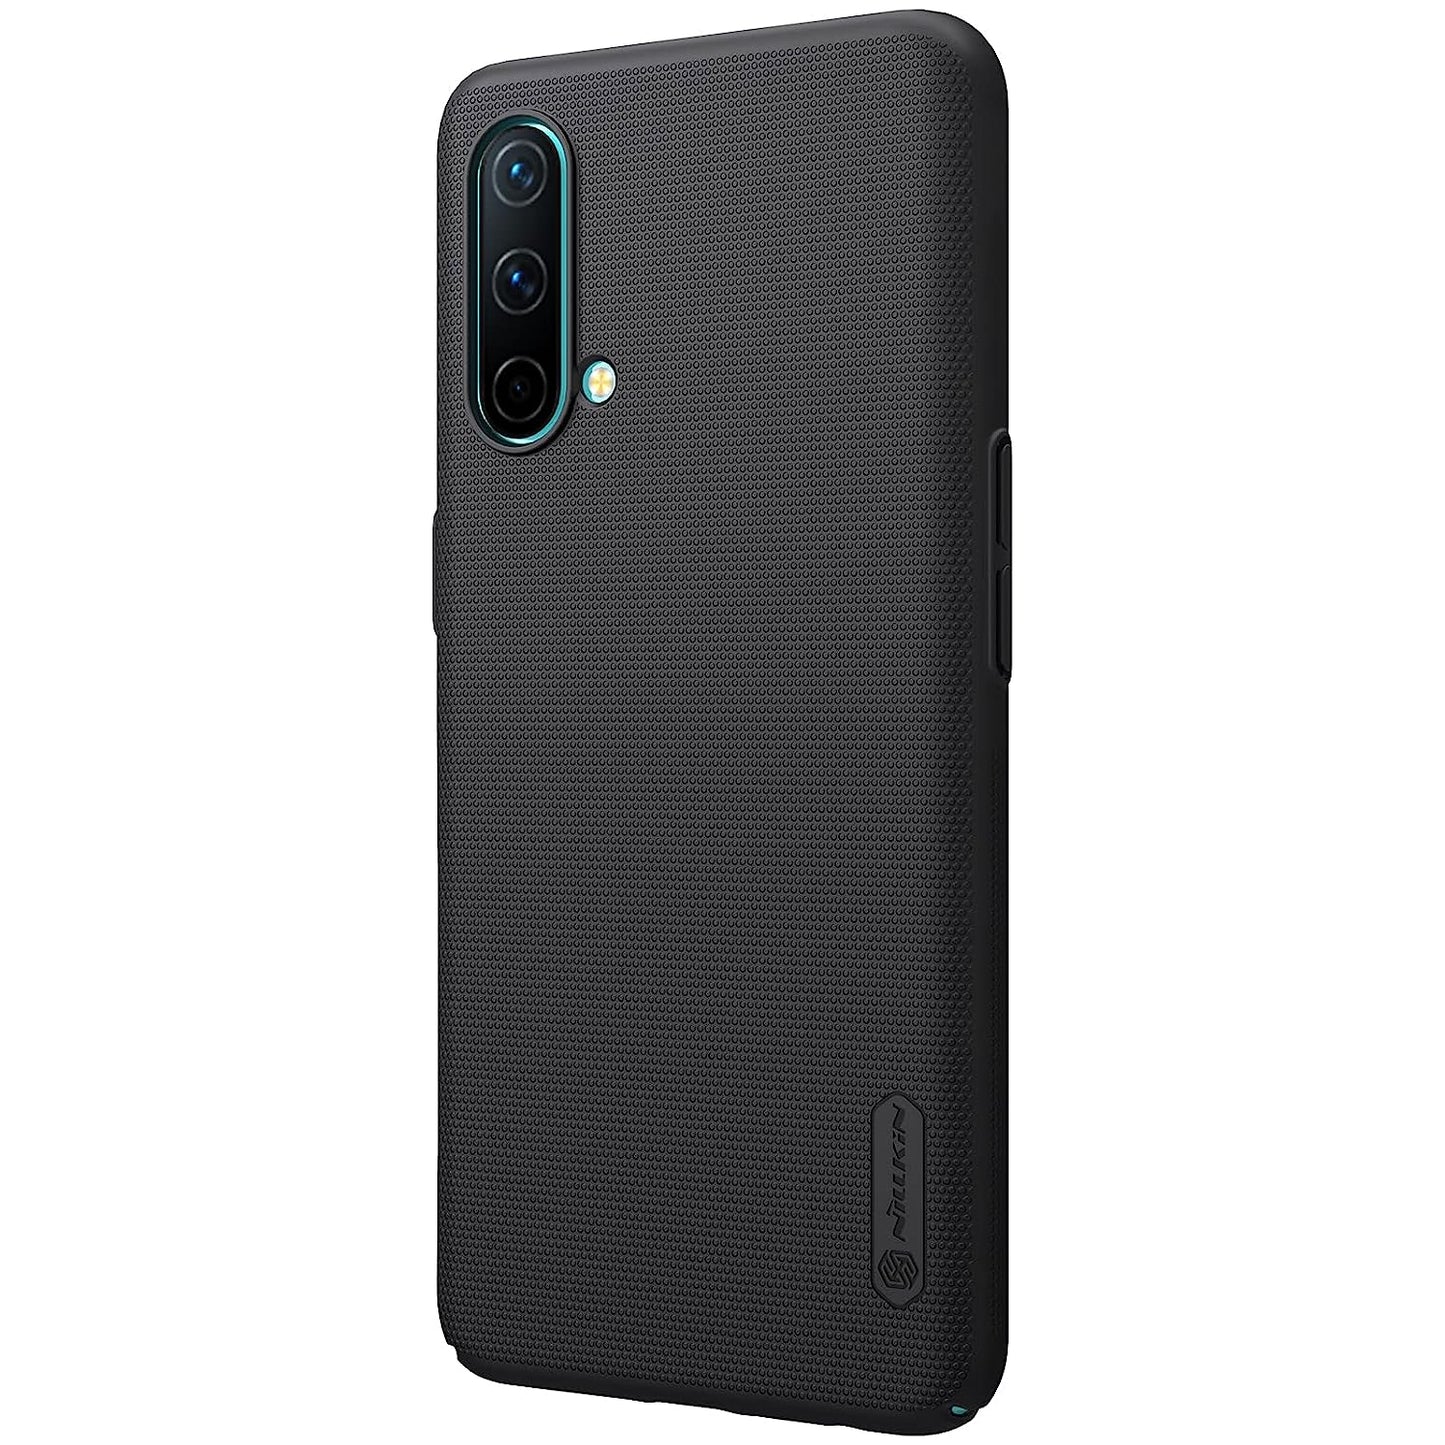 Nillkin Case for OnePlus Nord CE 5G (6.43" Inch) Super Frosted Hard Back Cover PC Black Color